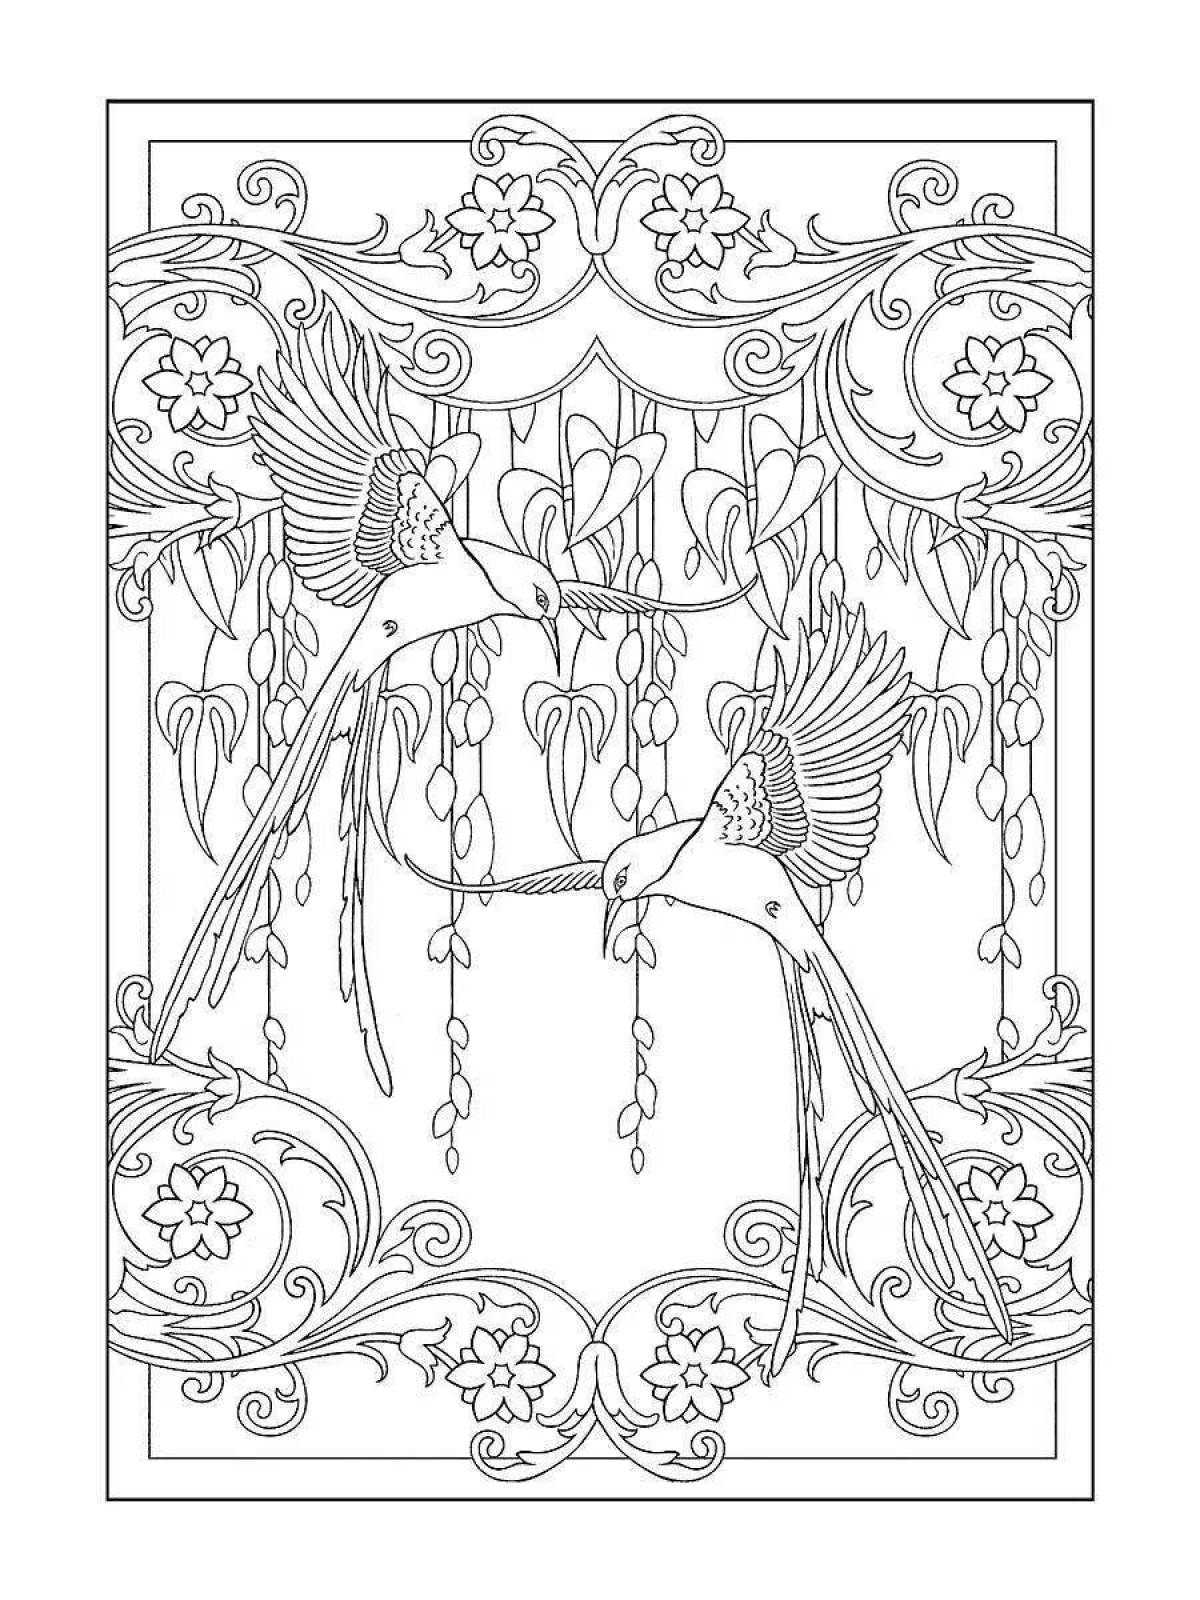 Magic coloring pages magical patterns